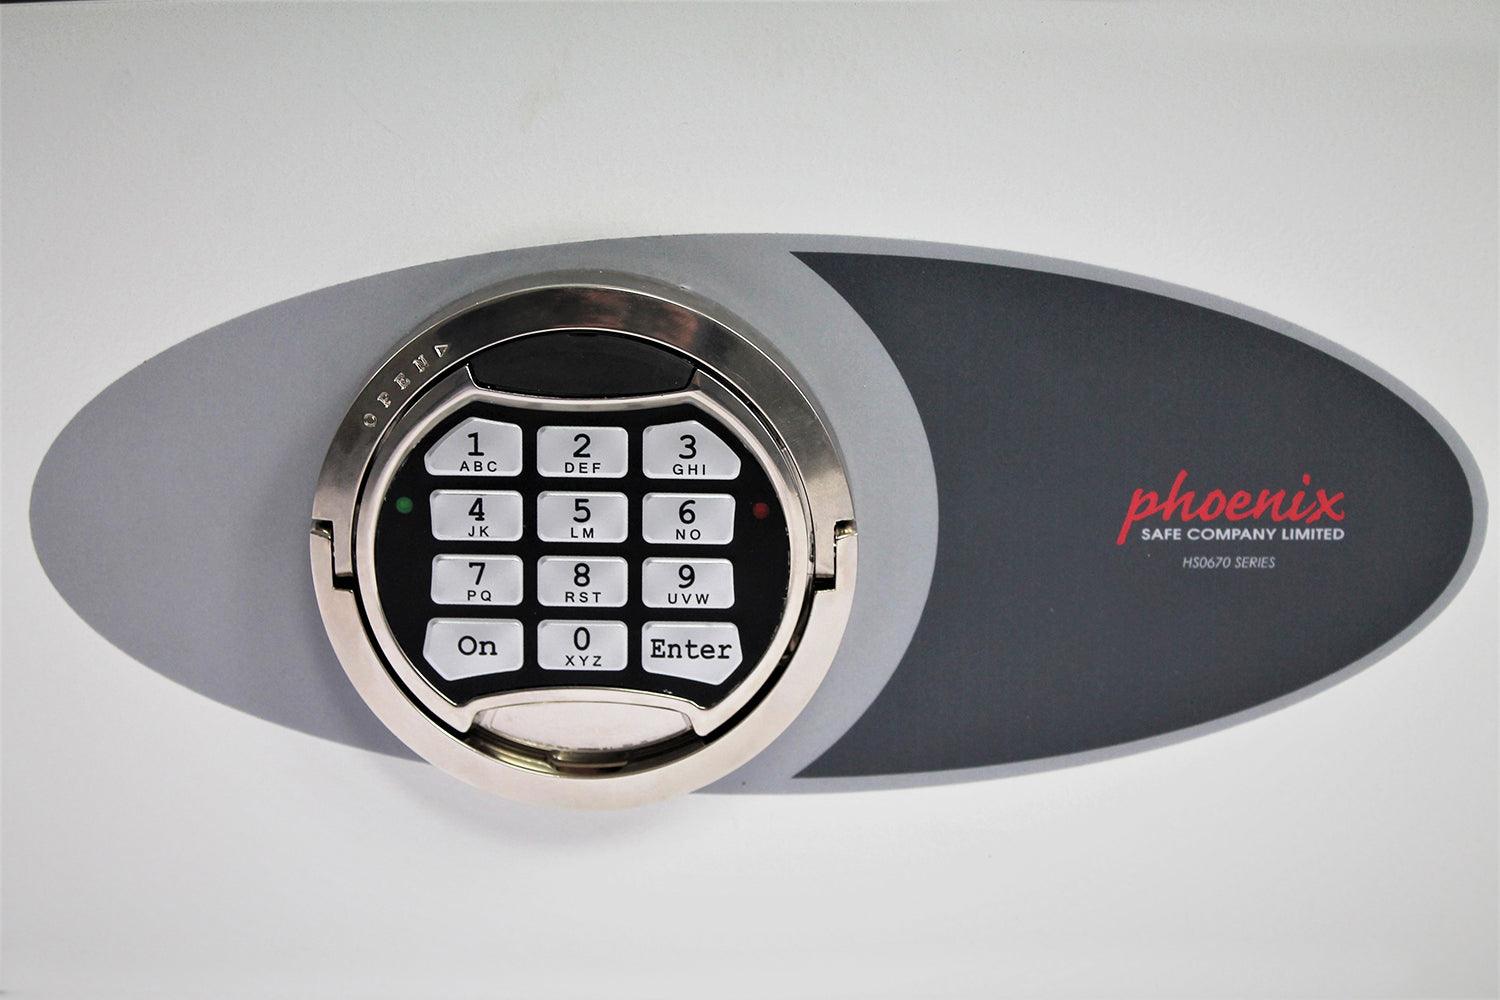 Phoenix Venus HS0671E Small High Security Safe - Electronic Lock - Safe Fortress